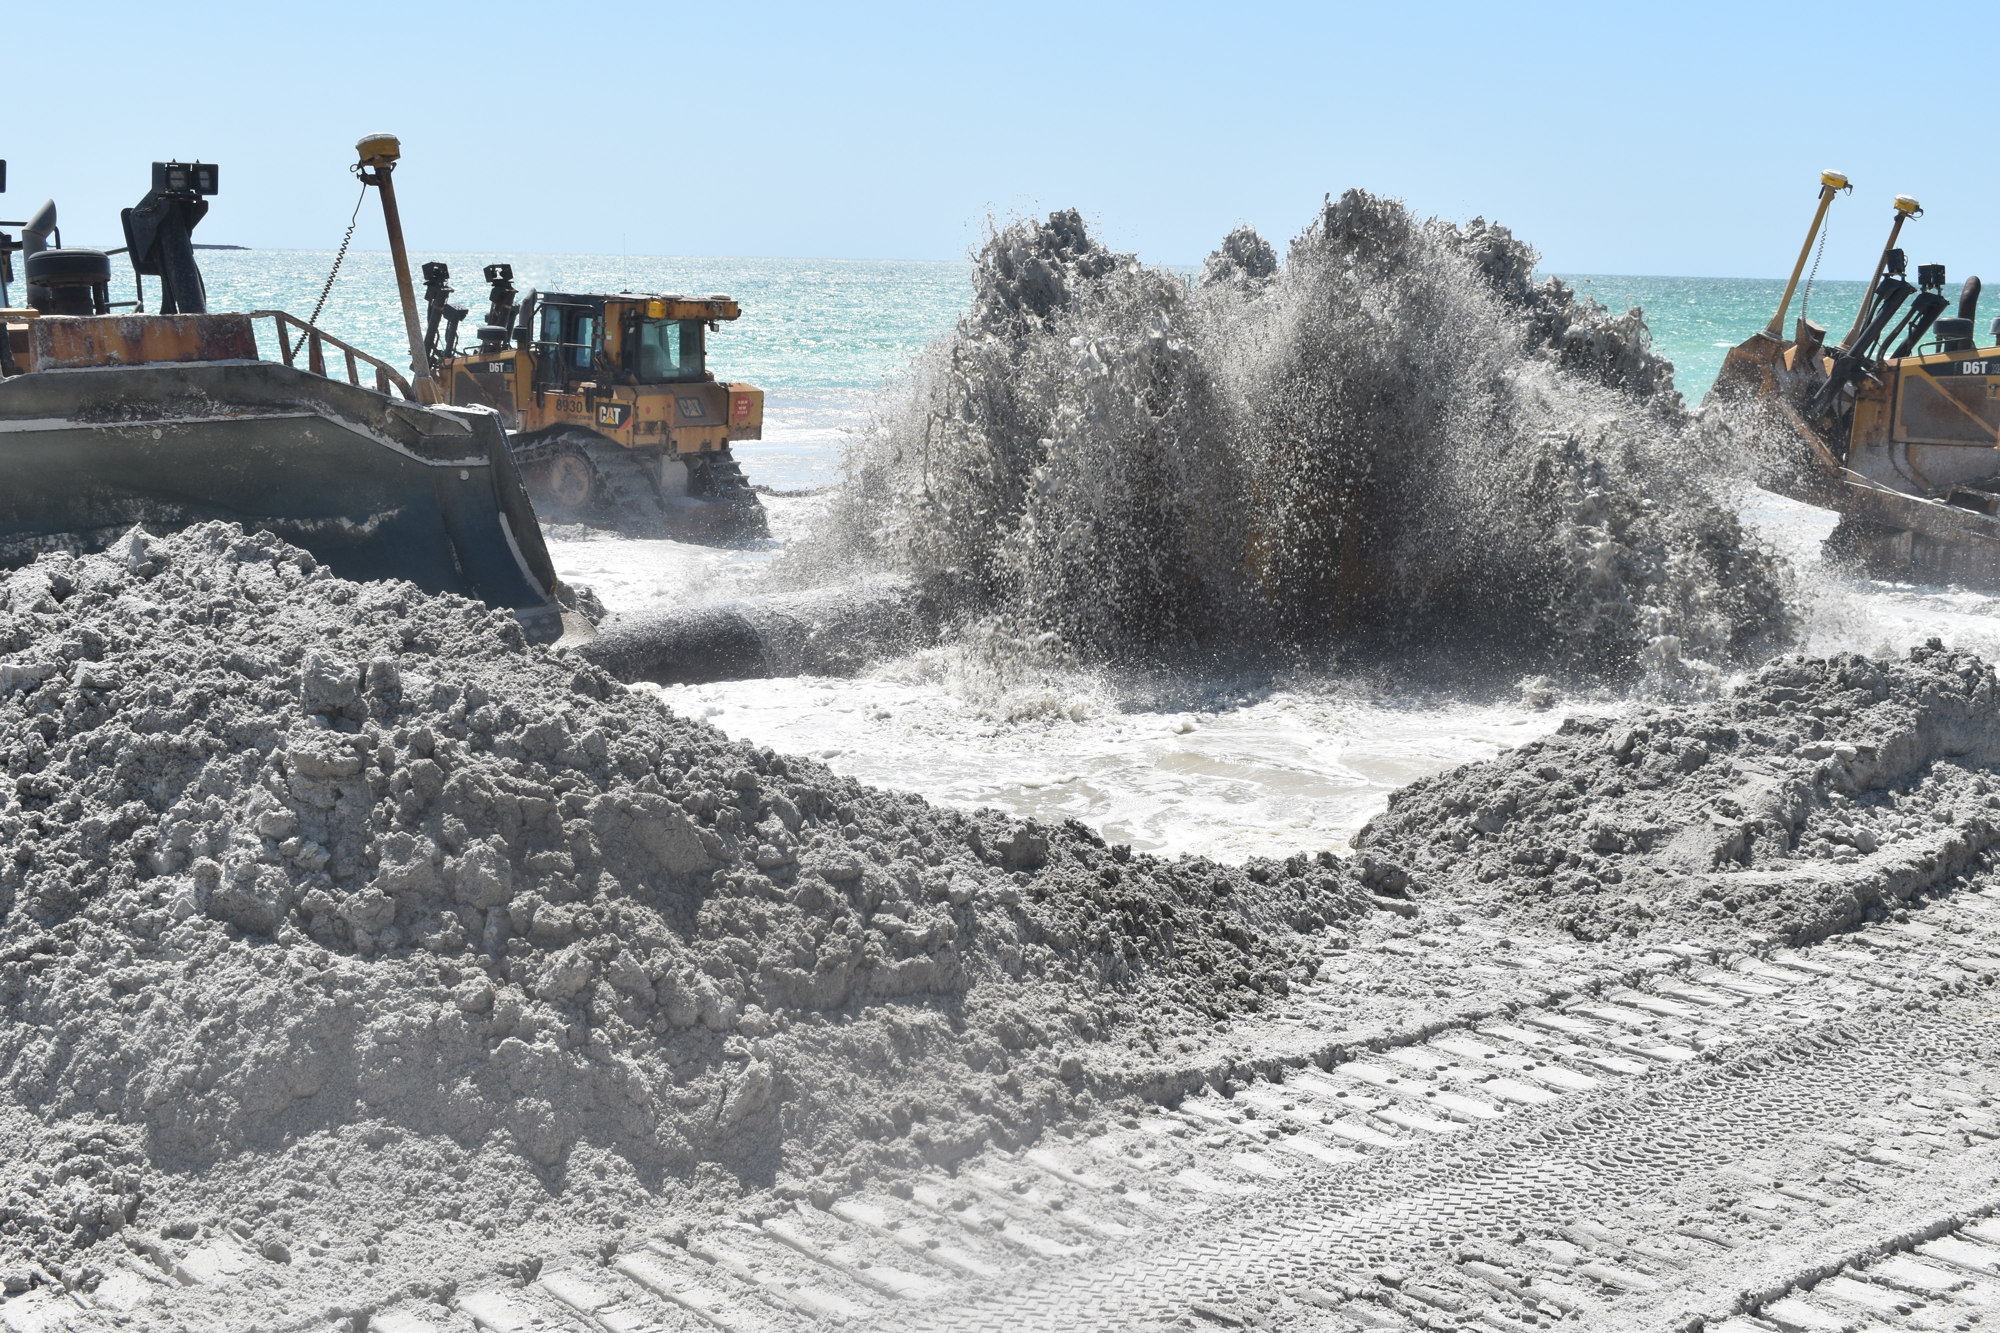 2020-2021: In the most recent round of renourishment, completed in 2021,  the town placed 1 million cubic yards of sand in about a year's time, a $36 million project that affected miles of beach along the Key.  